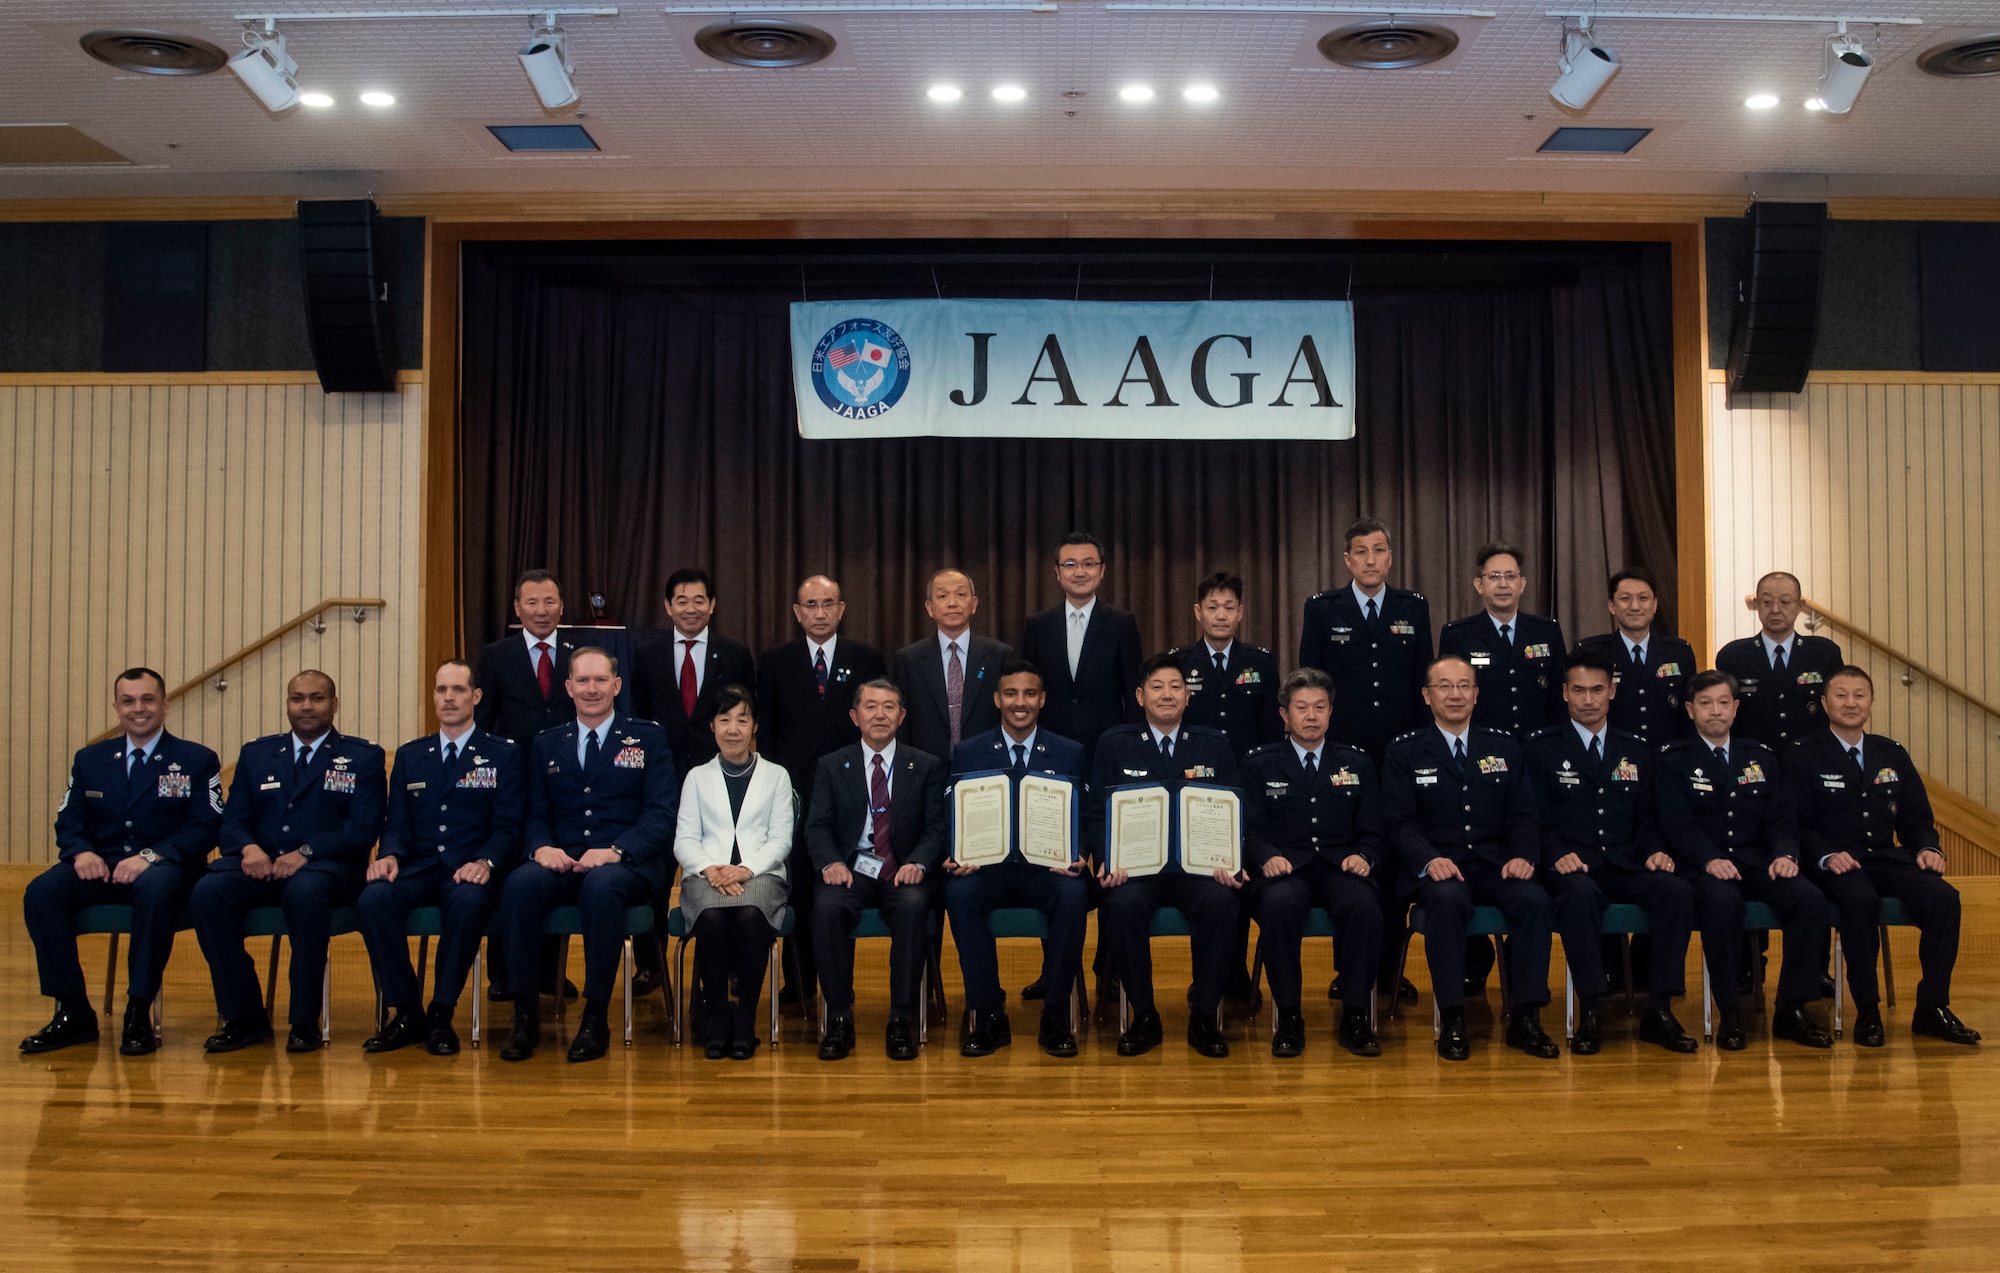 U.S. Air Force 35th Fighter Wing Airmen and the Japan-America Air Force Goodwill Association leaders pose for a group photo after a JAAGA award ceremony at Misawa Air Base, Japan, March 6, 2019. Misawa City established the association 21 years ago and ever since, Misawa AB and the JAAGA members held award ceremonies to honor the selected U.S. Air Force and Japan Air Self-Defense Force enlisted service members, who strive to build the U.S. and Japan partnership. (U.S. Air Force photo by Senior Airman Sadie Colbert)